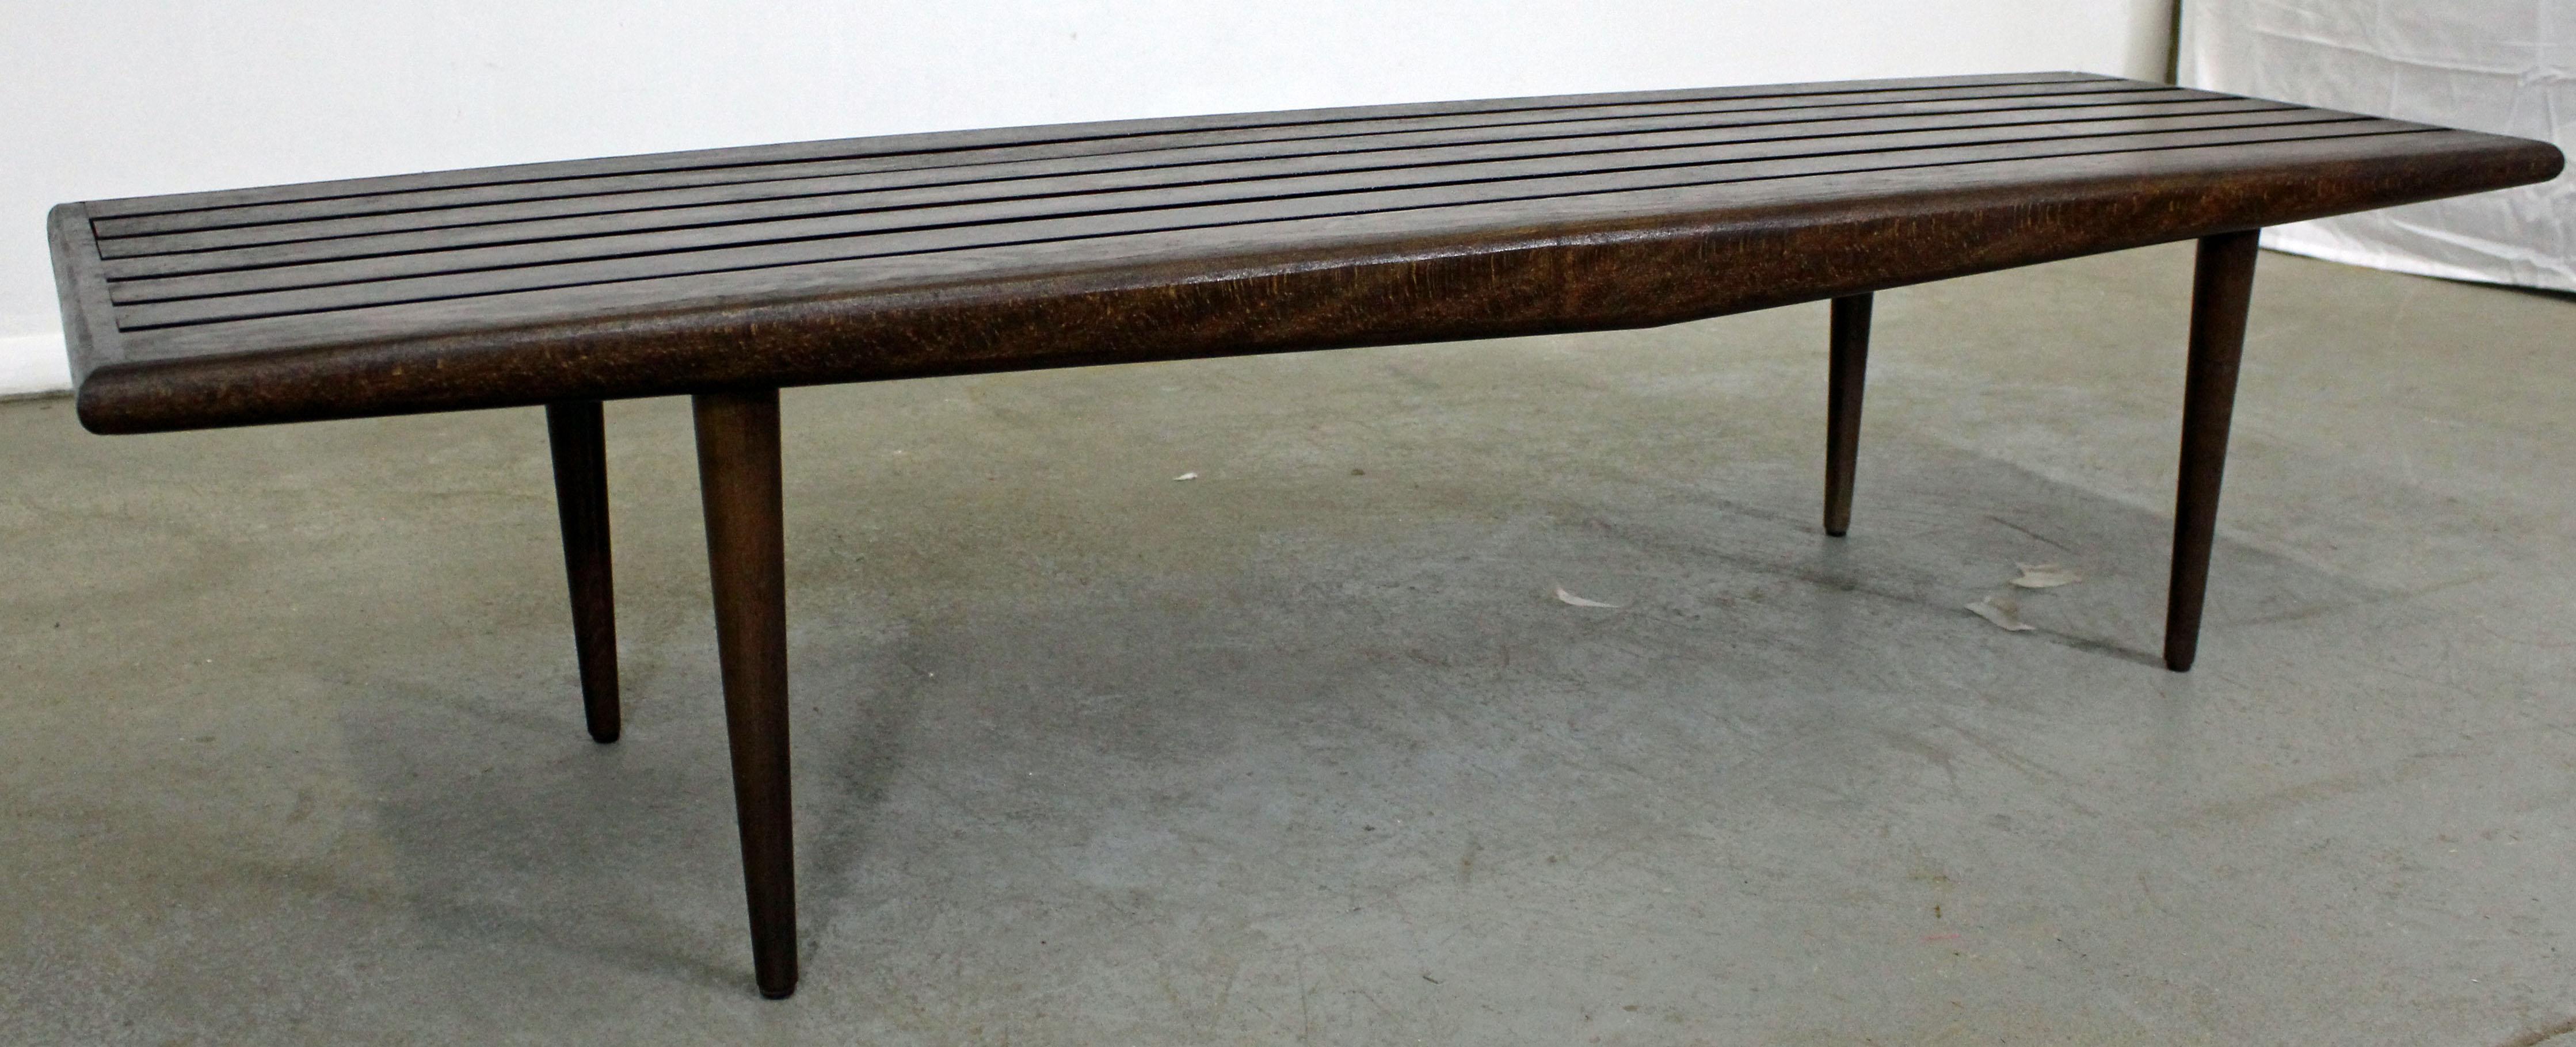 Offered is a Mid-Century Modern walnut slat bench coffee table. It is in excellent condition, showing little age wear (has been refinished, minor chips/wear). It is not signed. Check out our other listings for more vintage, primitive and antique